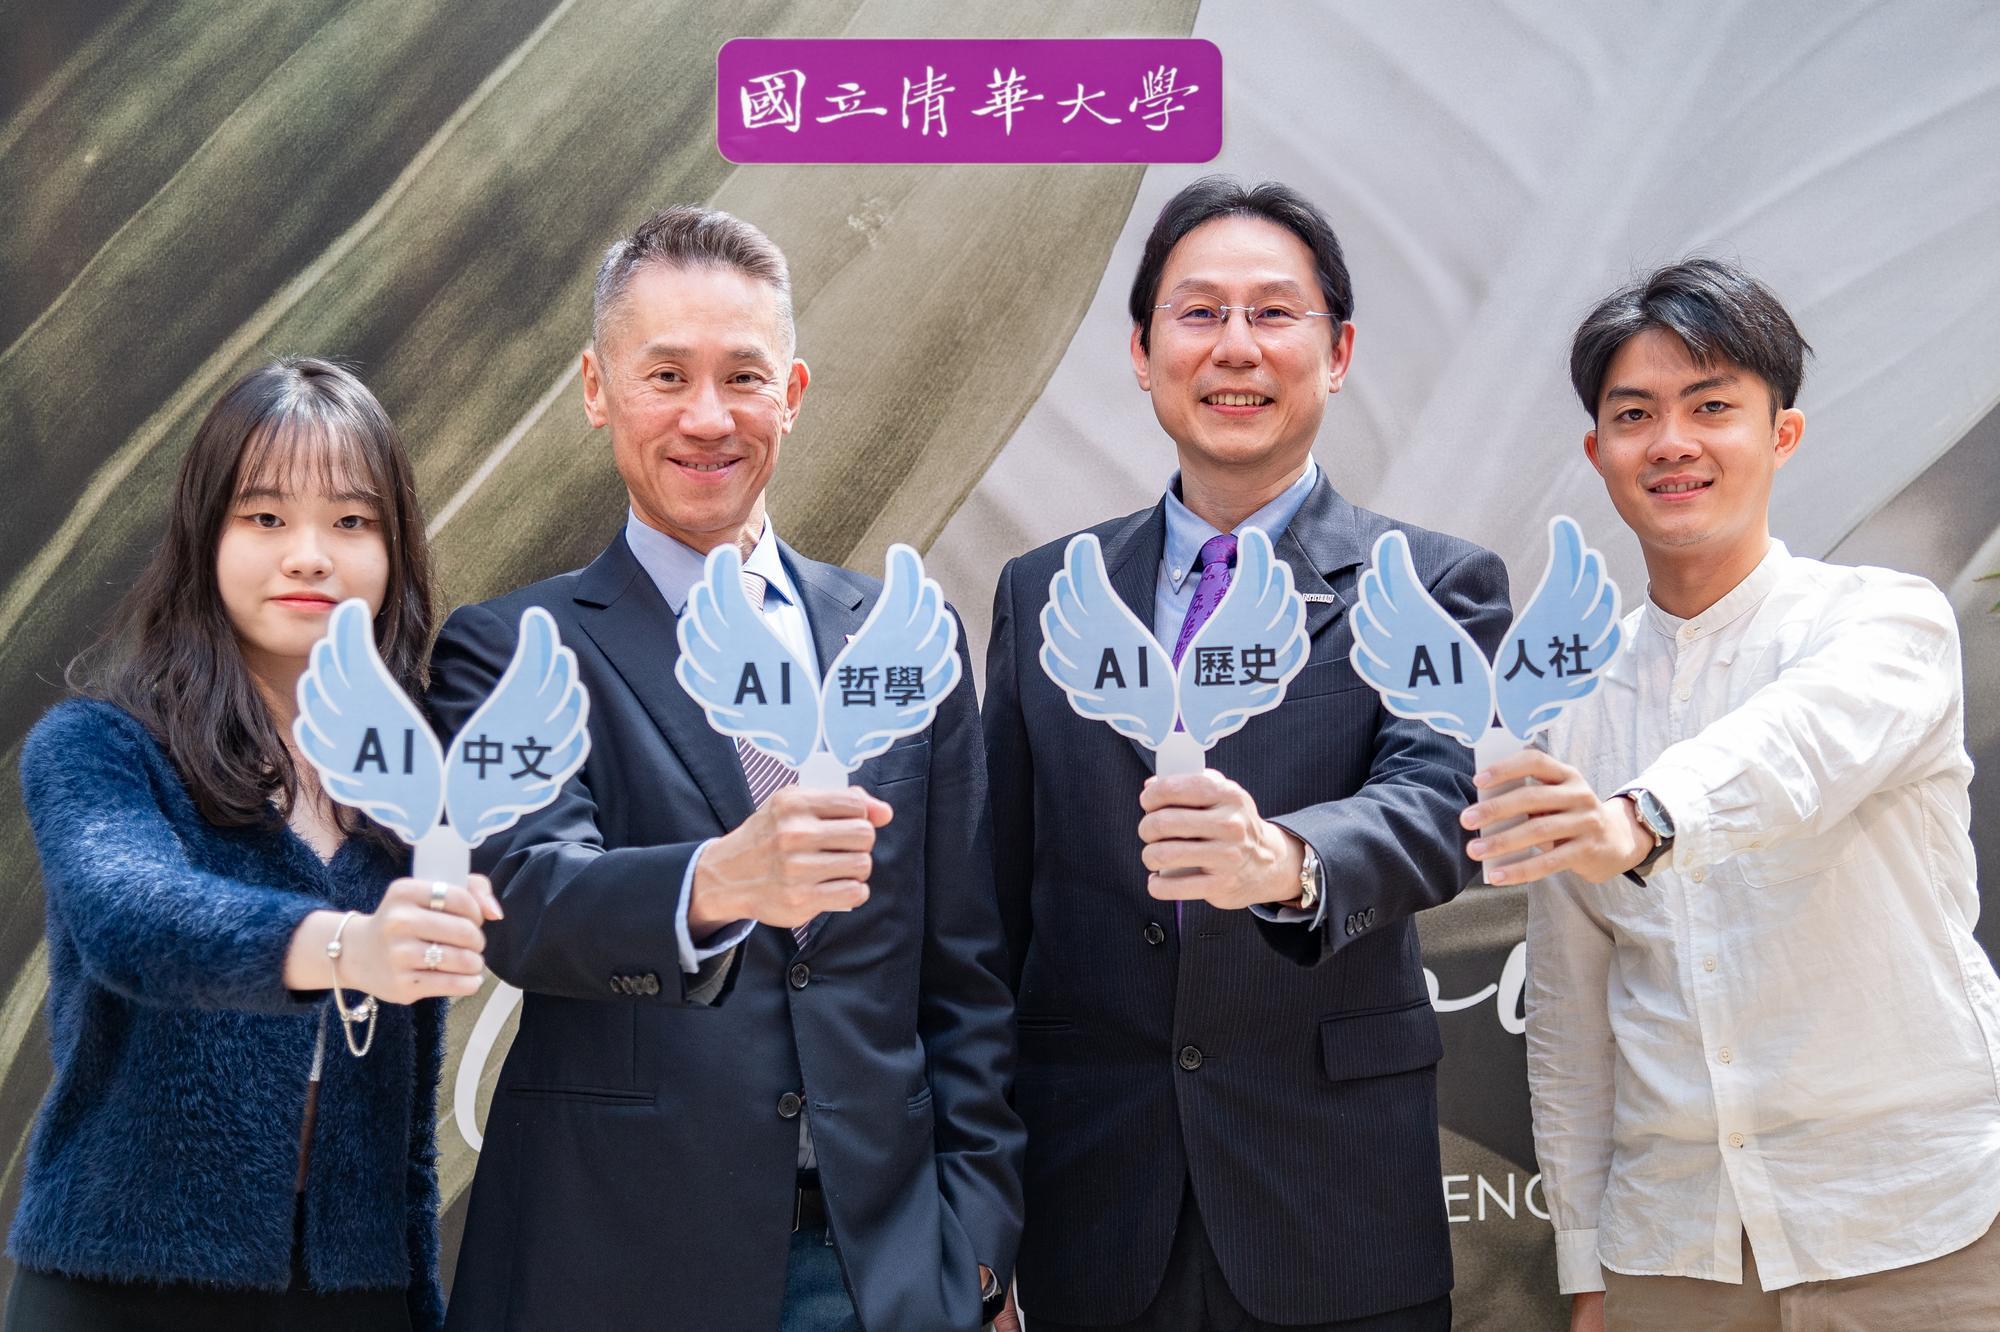 NTHU combines generative AI teaching with humanities and social science courses. From left: Ting-Yi Wu (吳庭儀), a sophomore in the Department of Chinese Literature; President W. John Kao (高為元); Yung-Hsien Wu (巫勇賢), Vice Dean of Academic Affairs; and Ruei-Chen Hong (洪睿辰), a senior in the Interdisciplinary Program of Humanities and Social Sciences.